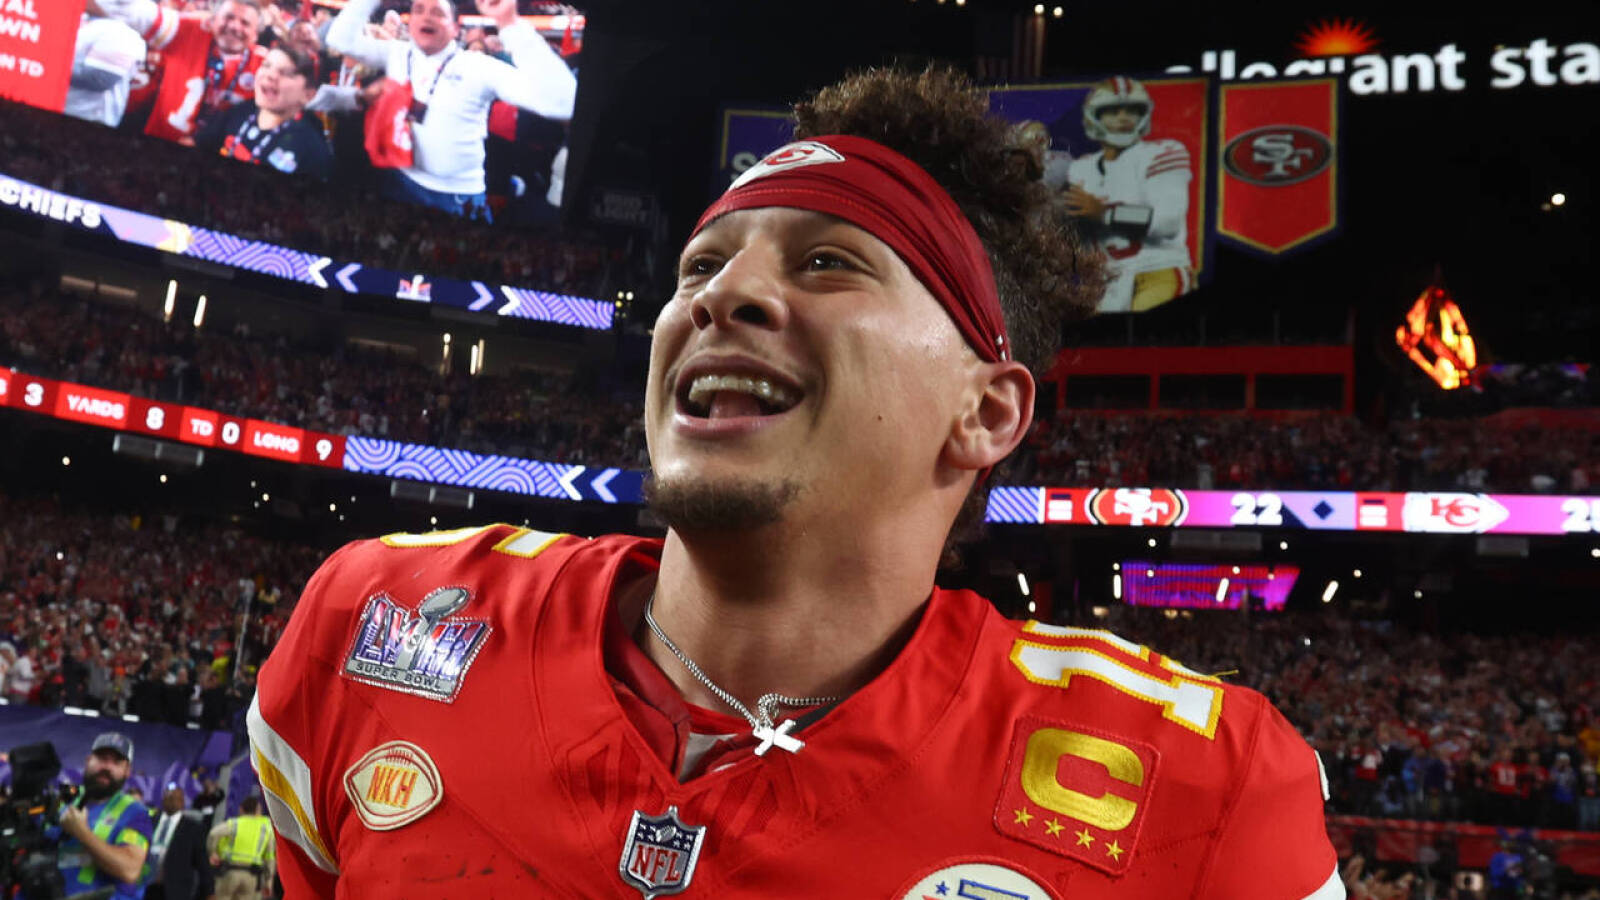 Patrick Mahomes Aims to Lead Chiefs to Unprecedented Third Straight Super Bowl Win